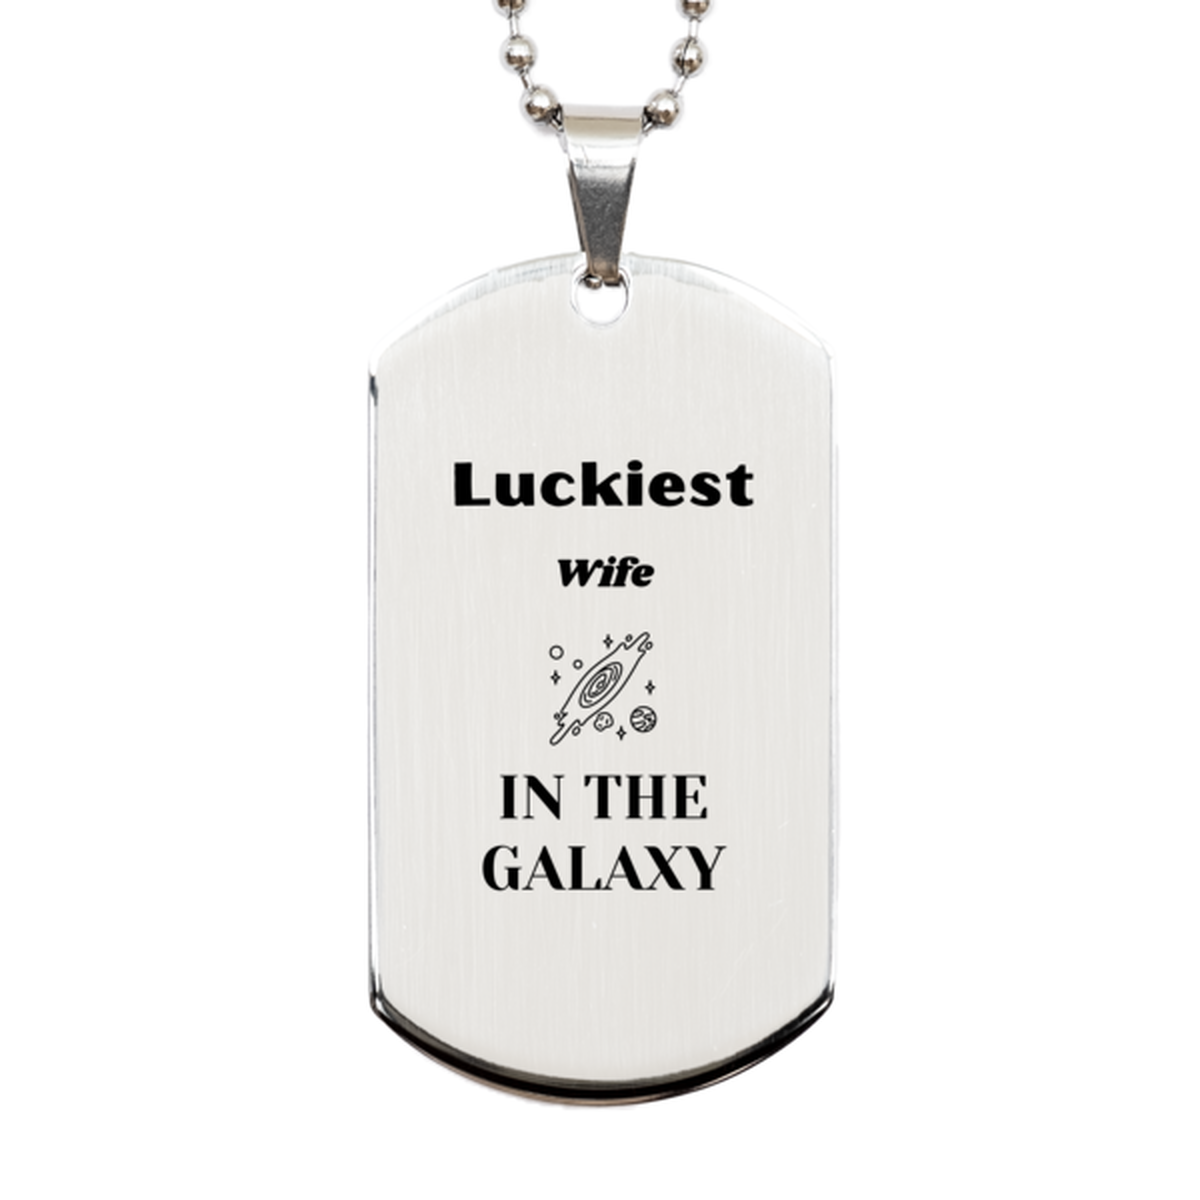 Luckiest Wife in the Galaxy, To My Wife Engraved Gifts, Christmas Wife Silver Dog Tag Gifts, X-mas Birthday Unique Gifts For Wife Men Women